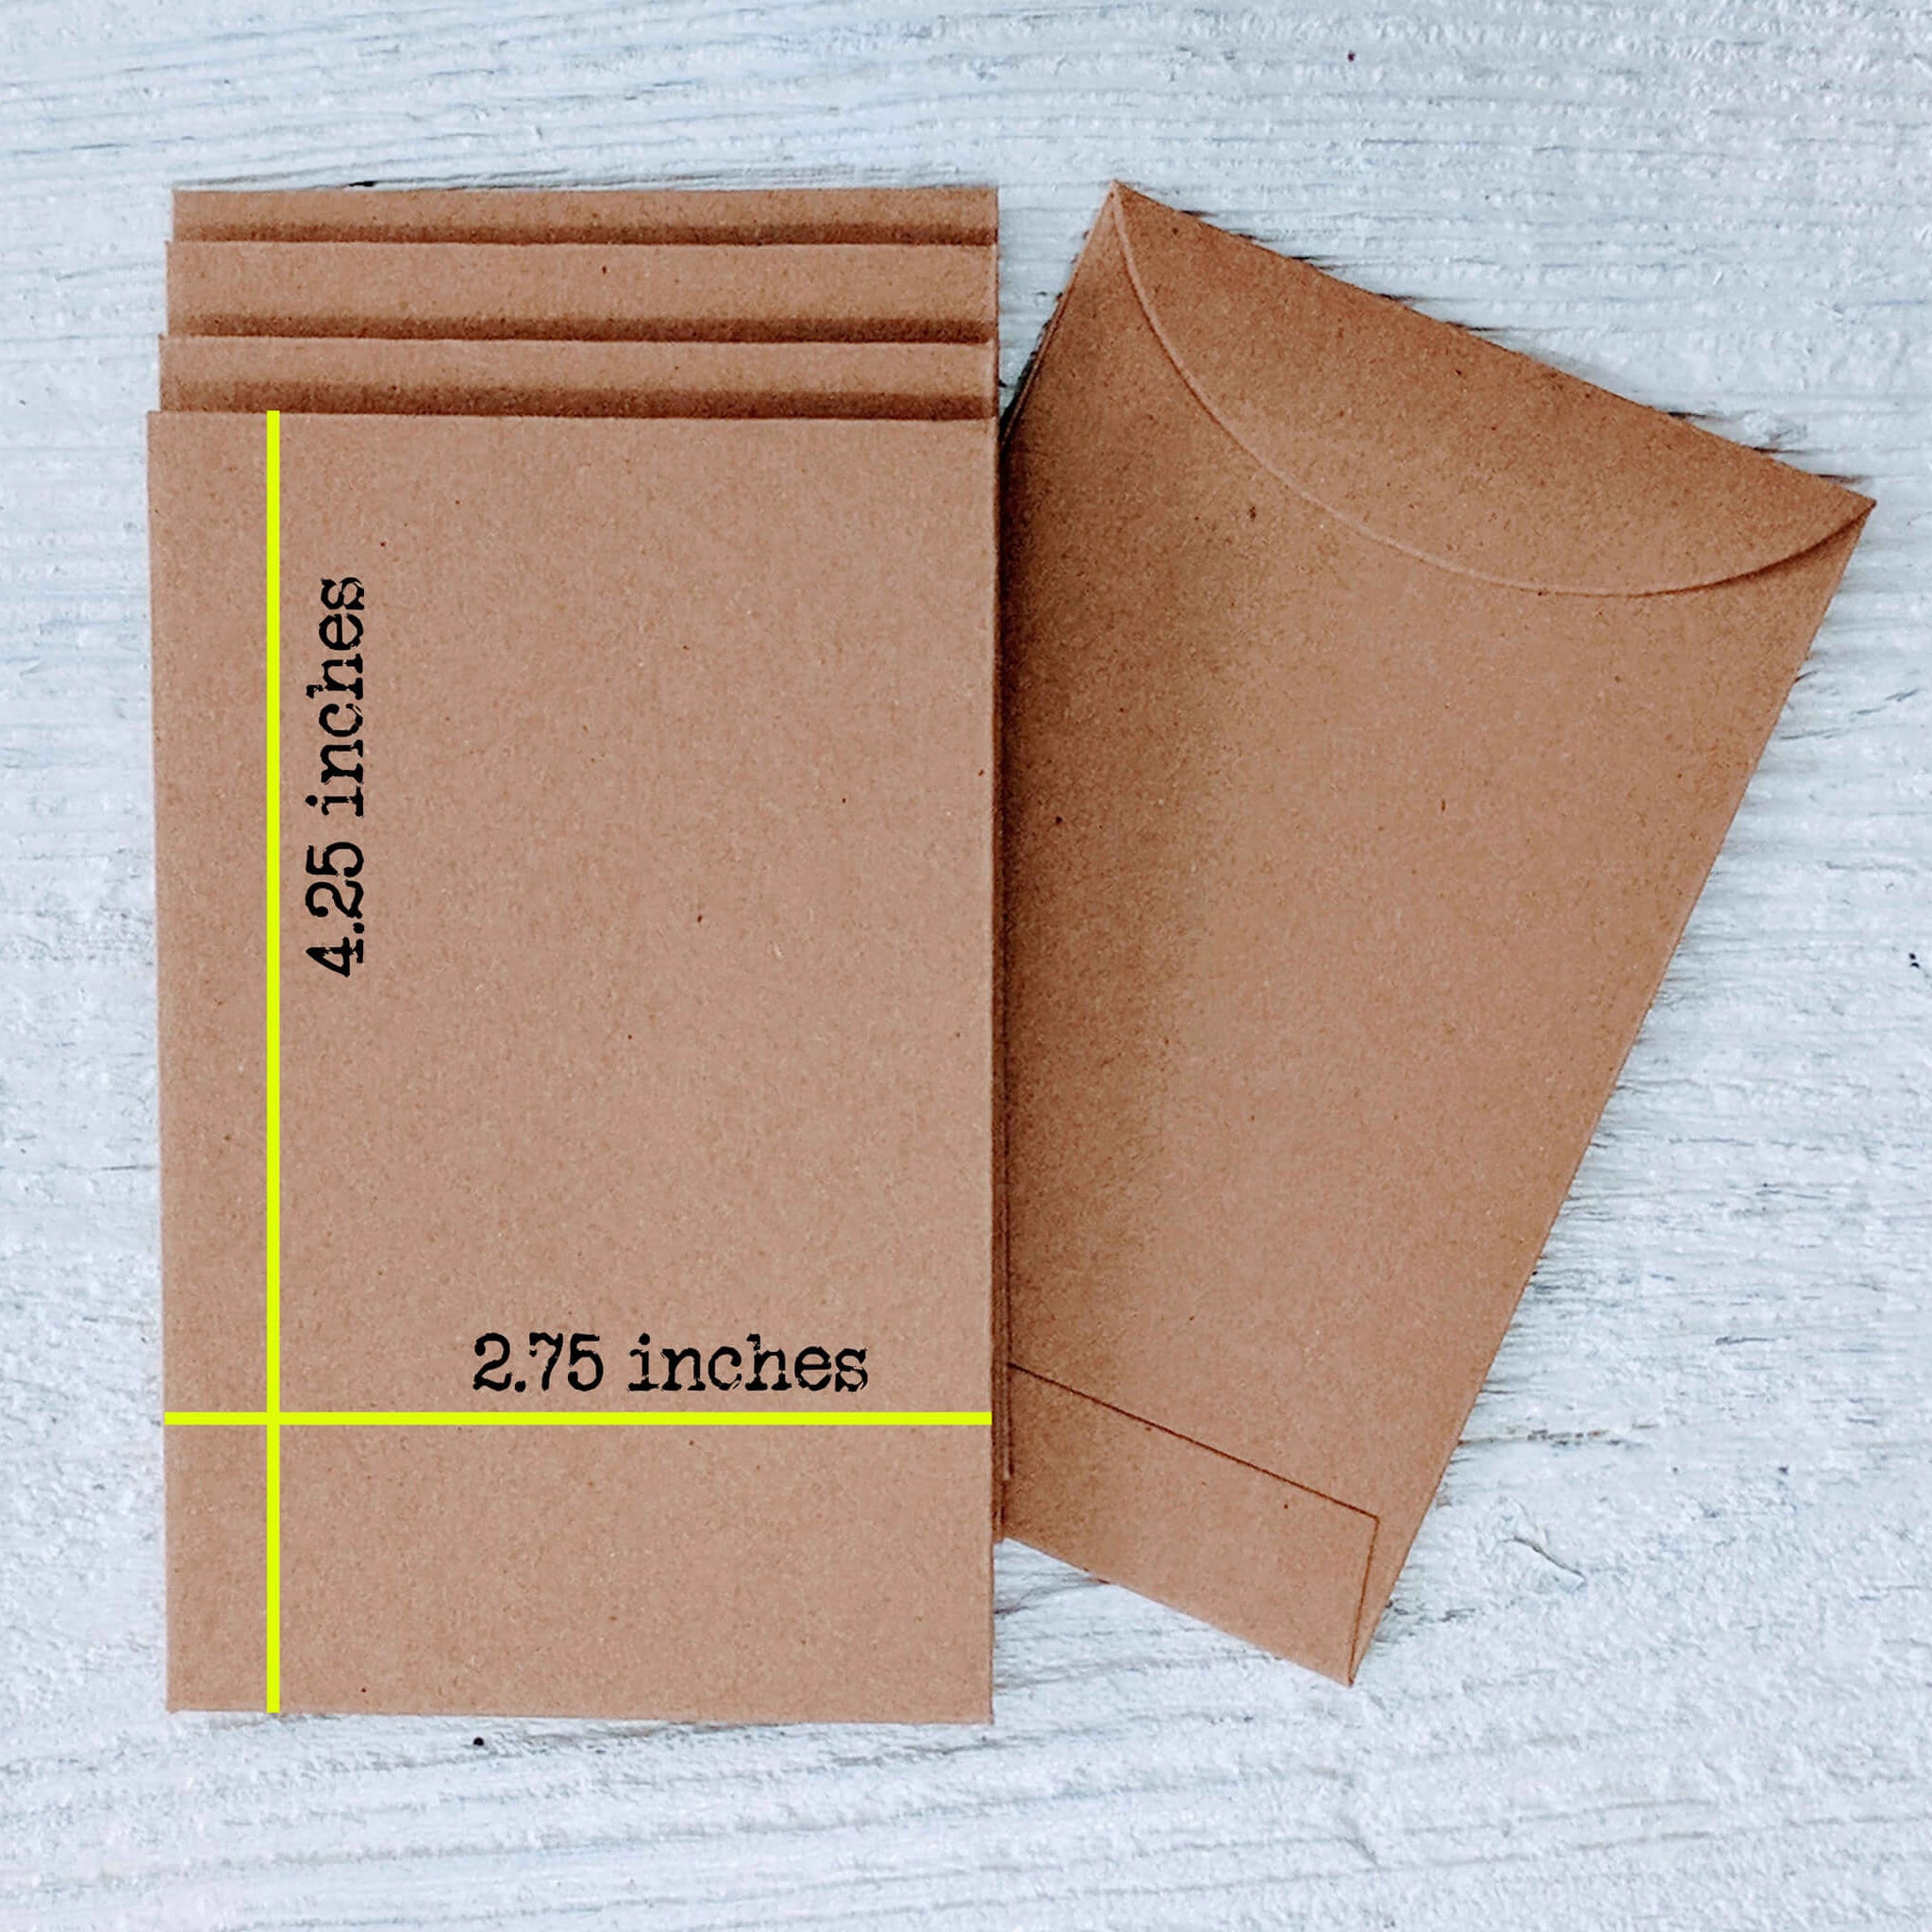 200 Pieces Glassine Envelopes 2.5x4.25 Inch Glassine Mini Lotto Lottery  Ticket Holders Wedding Guest Favor Tissue Seed Envelope Holder for Scratch